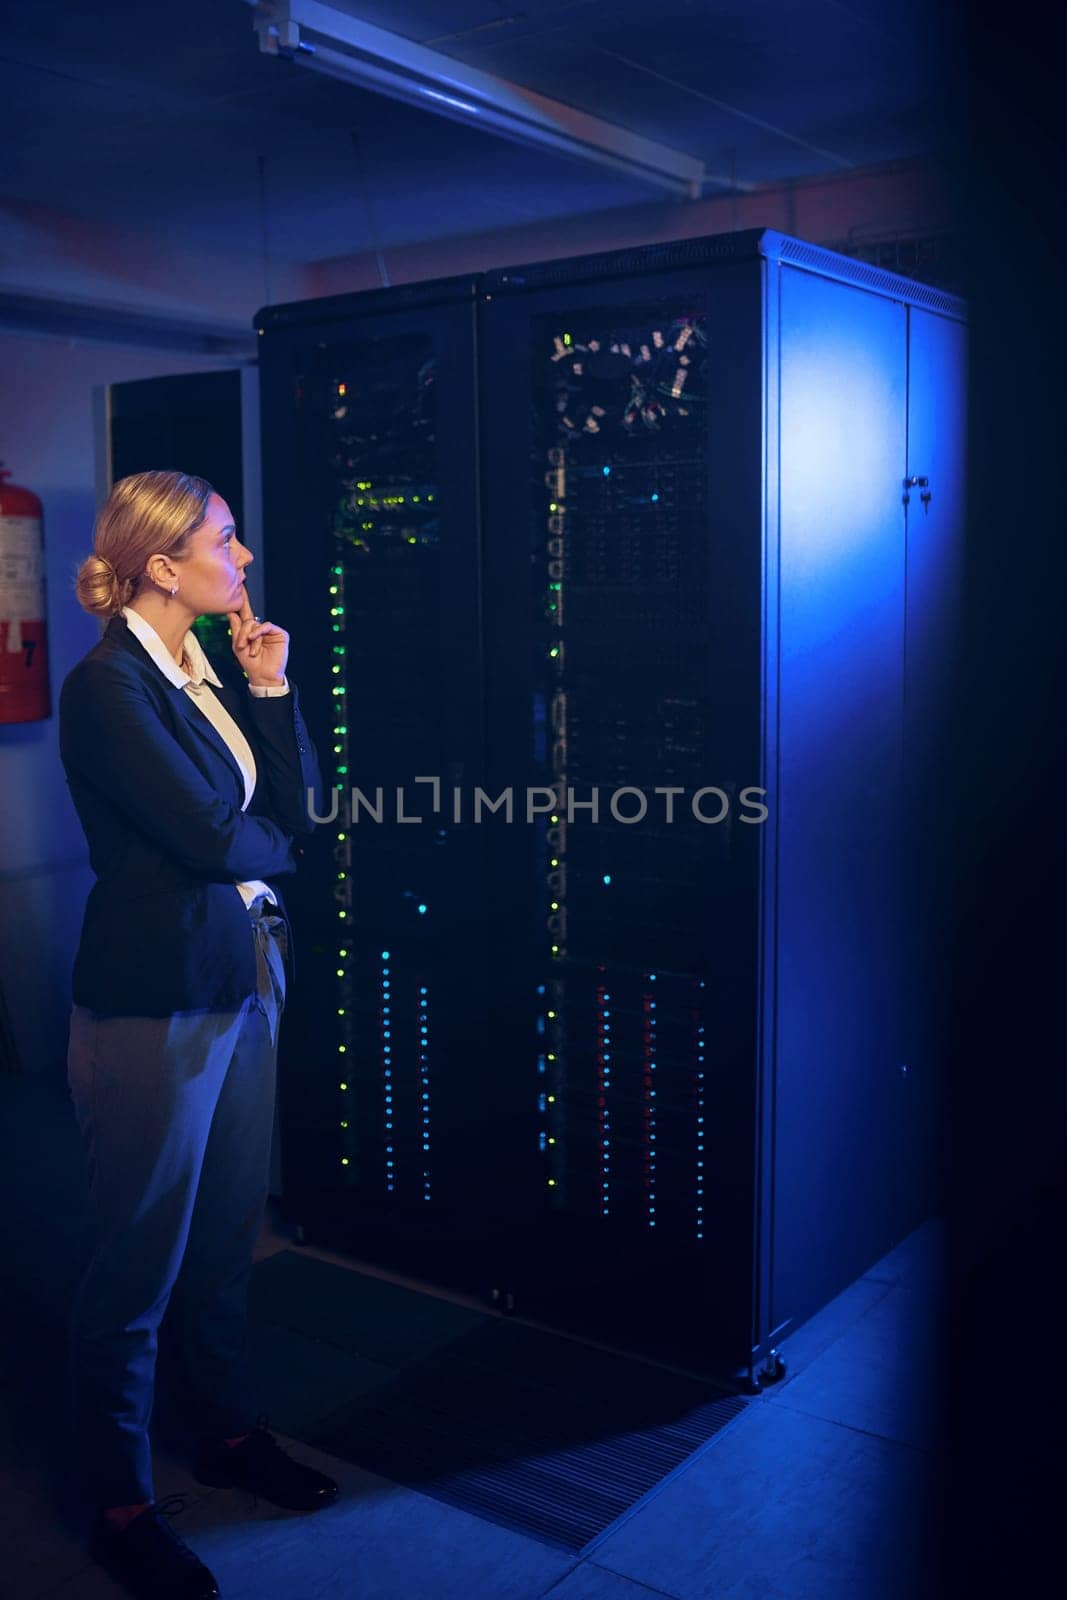 This is complex, let me think about it some more. a young woman looking thoughtful while working in a server room. by YuriArcurs